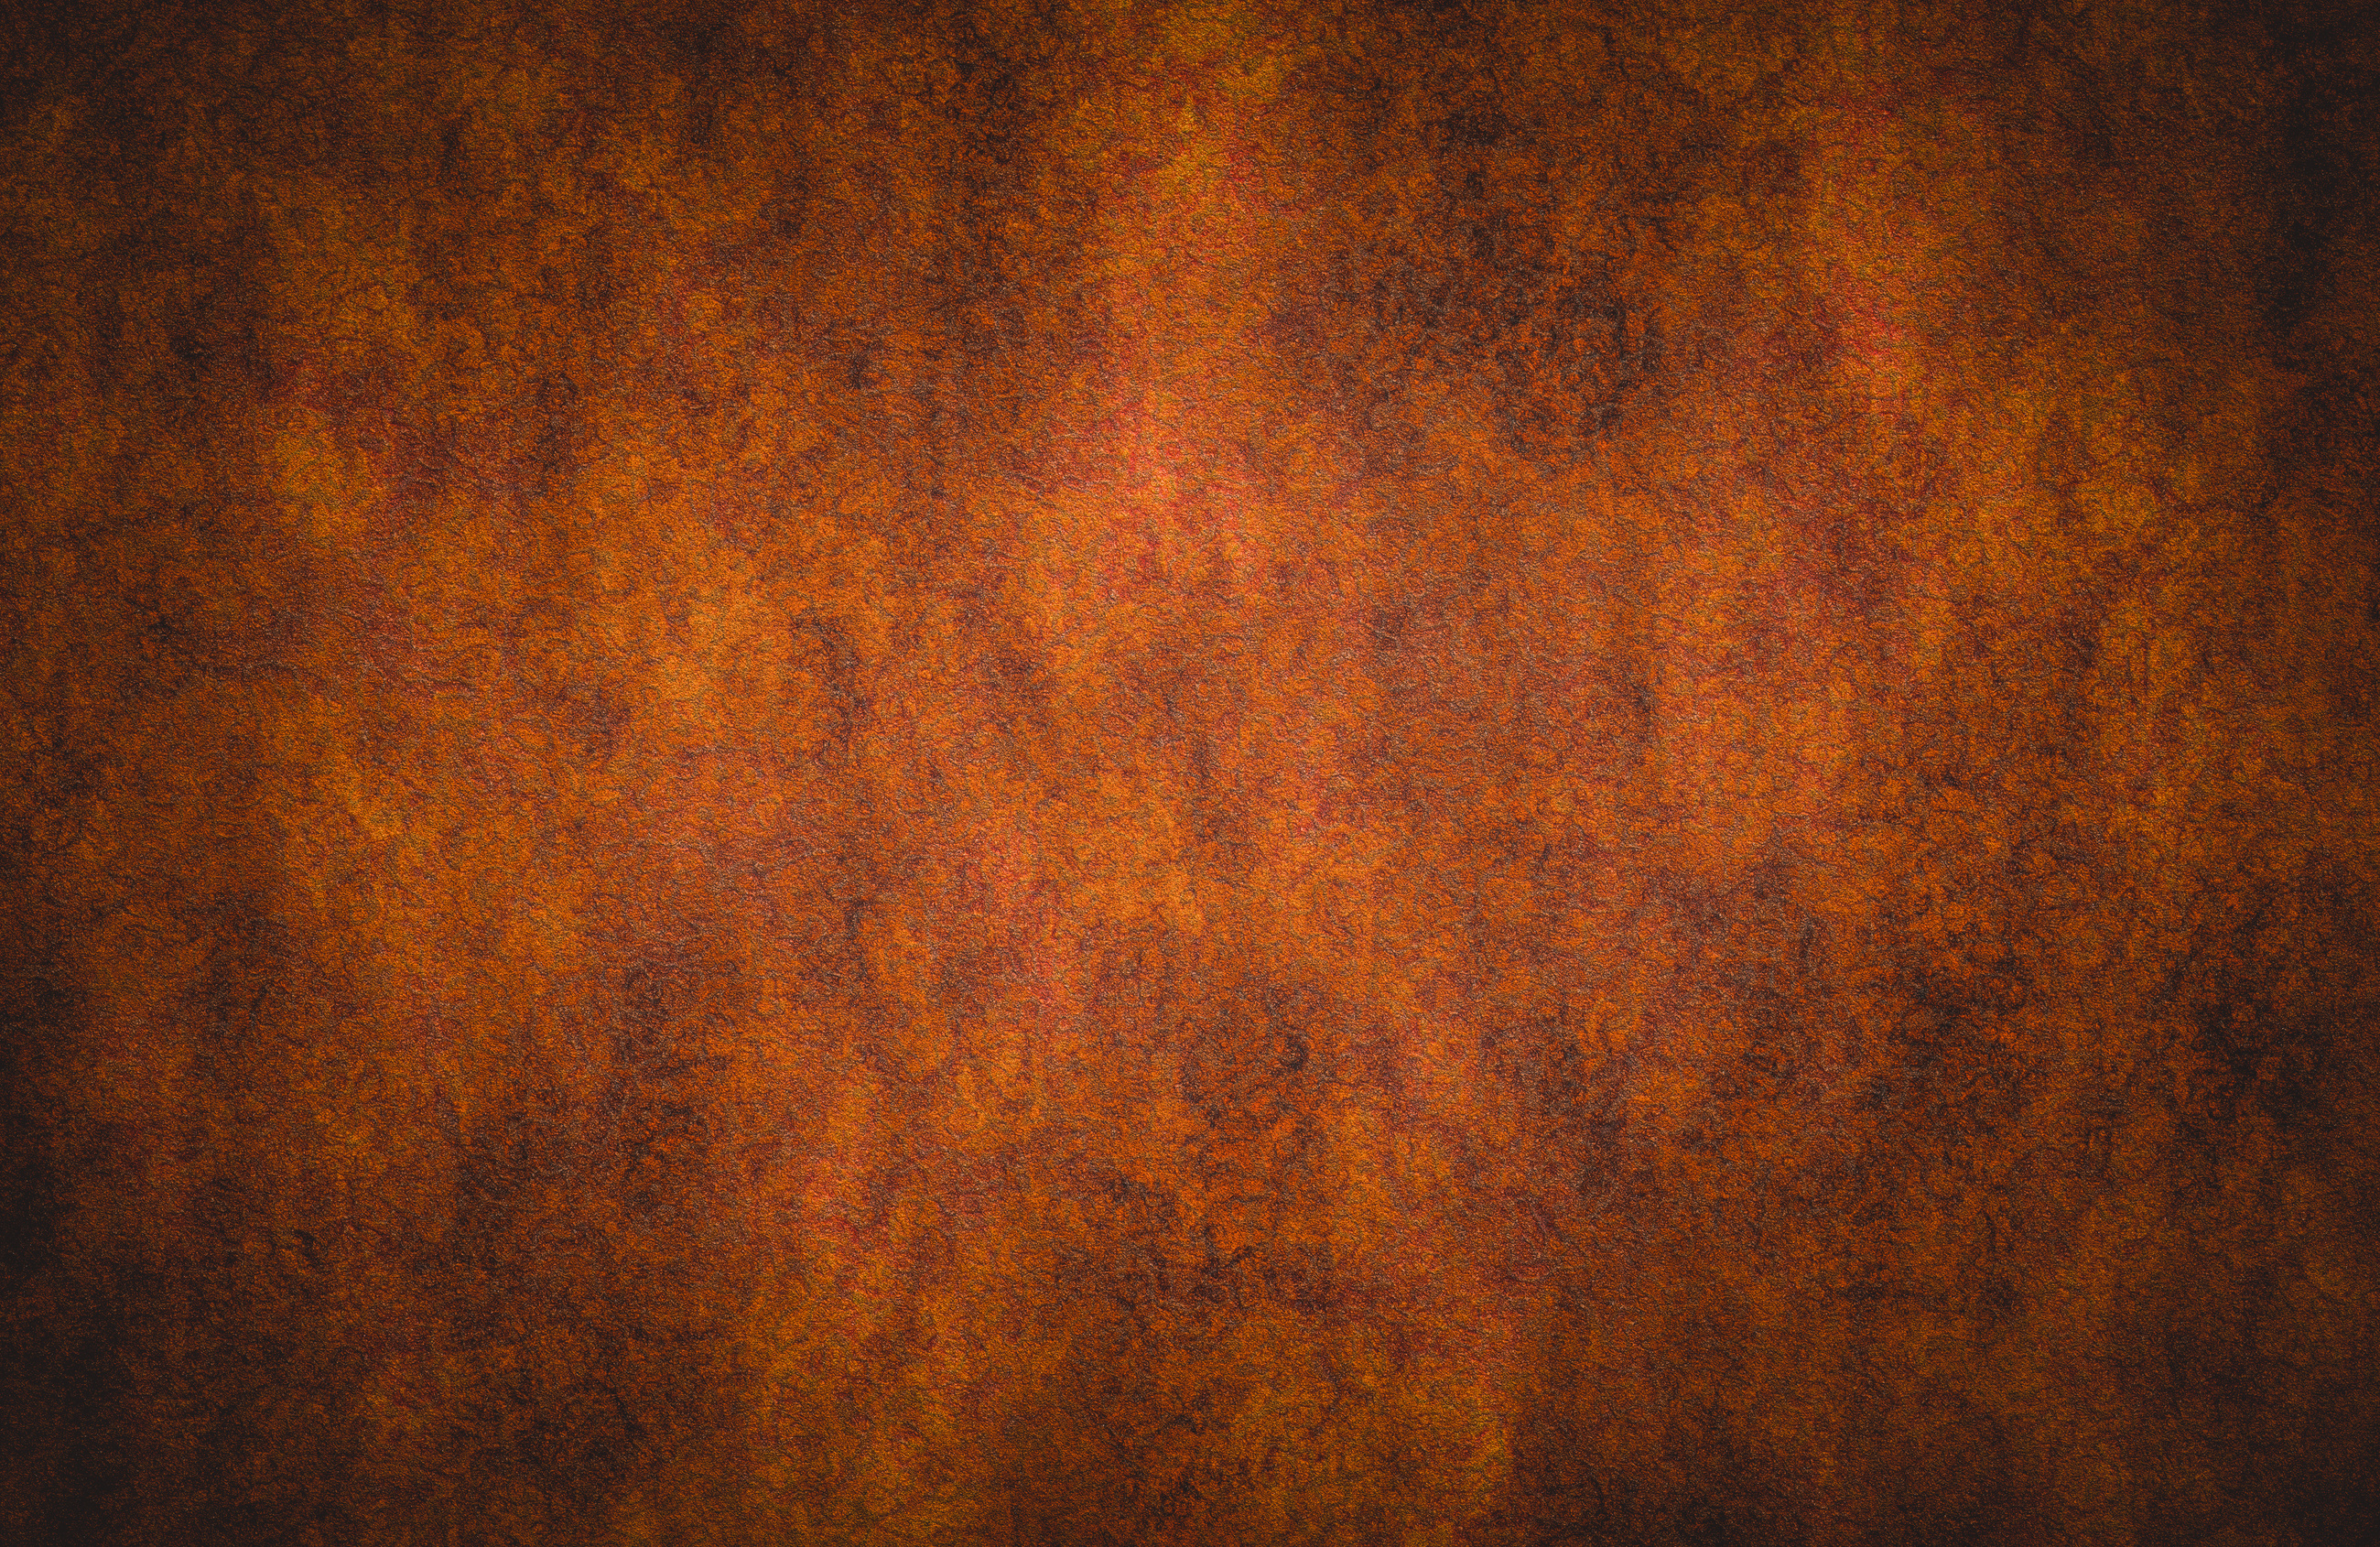 Metal rust background. Rusted iron